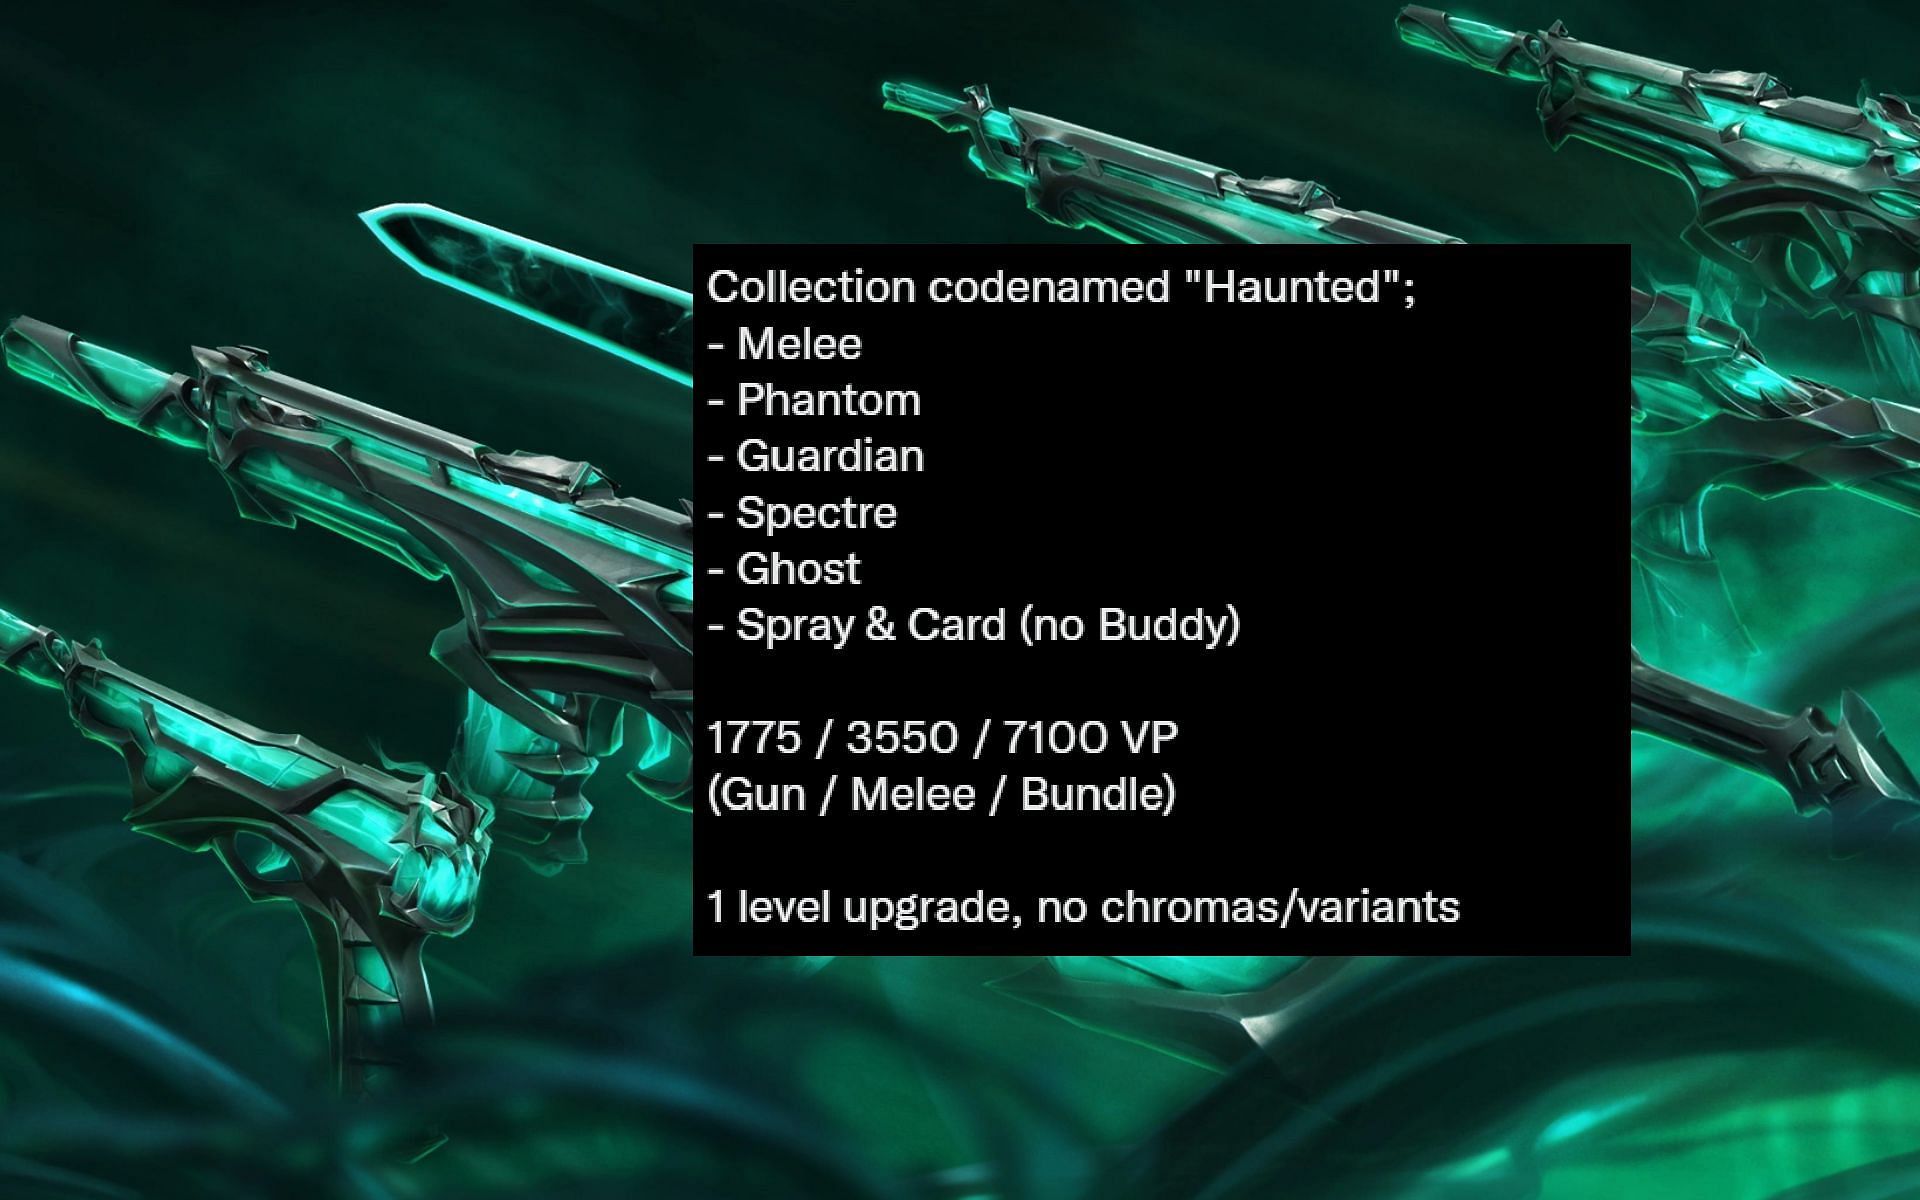 Valorant Prime 2.0 skins: Visuals and pricing